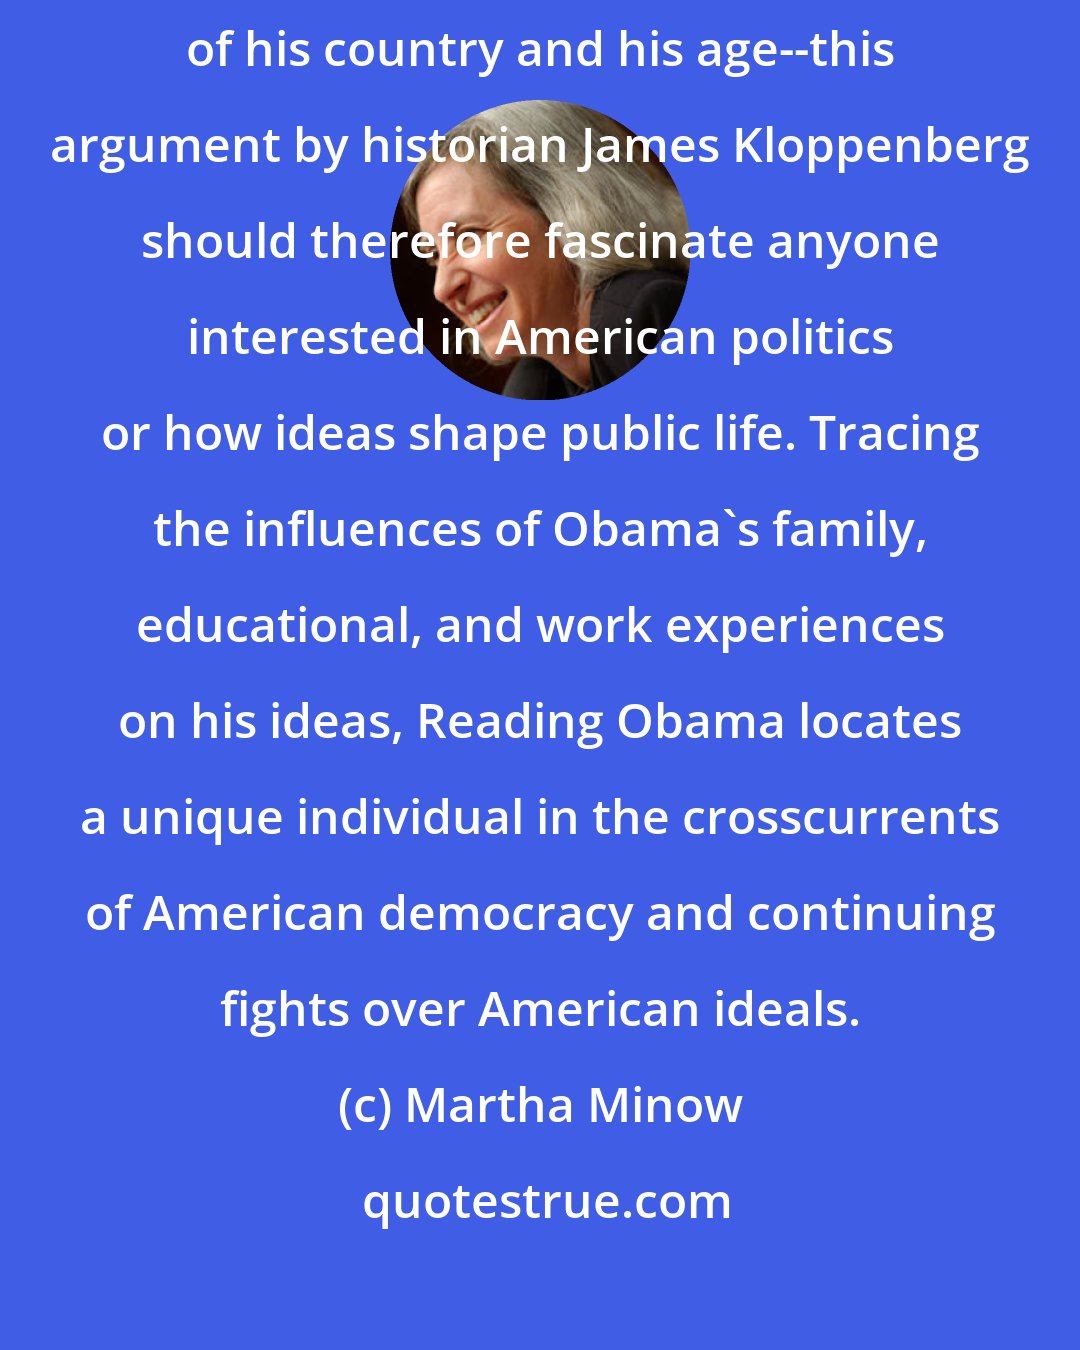 Martha Minow: Obama is not just a powerful speaker, but a thinker engaged with the ideas of his country and his age--this argument by historian James Kloppenberg should therefore fascinate anyone interested in American politics or how ideas shape public life. Tracing the influences of Obama's family, educational, and work experiences on his ideas, Reading Obama locates a unique individual in the crosscurrents of American democracy and continuing fights over American ideals.